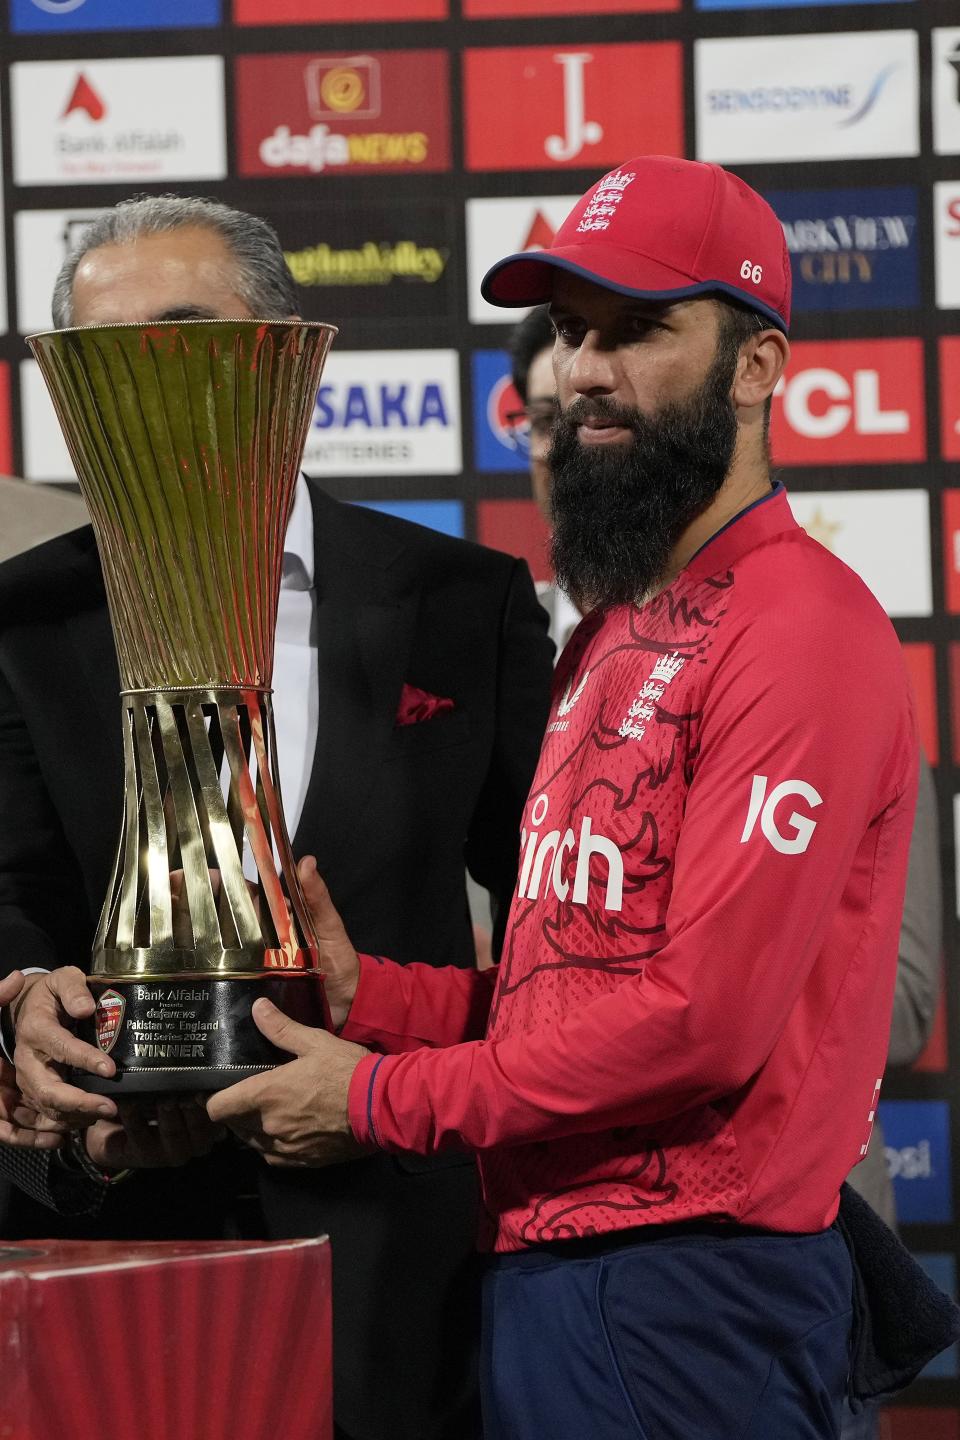 England's skipper Moeen Ali receives trophy after winning the twenty20 series during a presentation ceremony on the end of the seventh twenty20 cricket match between Pakistan and England, in Lahore, Pakistan, Sunday, Oct. 2, 2022. (AP Photo/K.M. Chaudary)